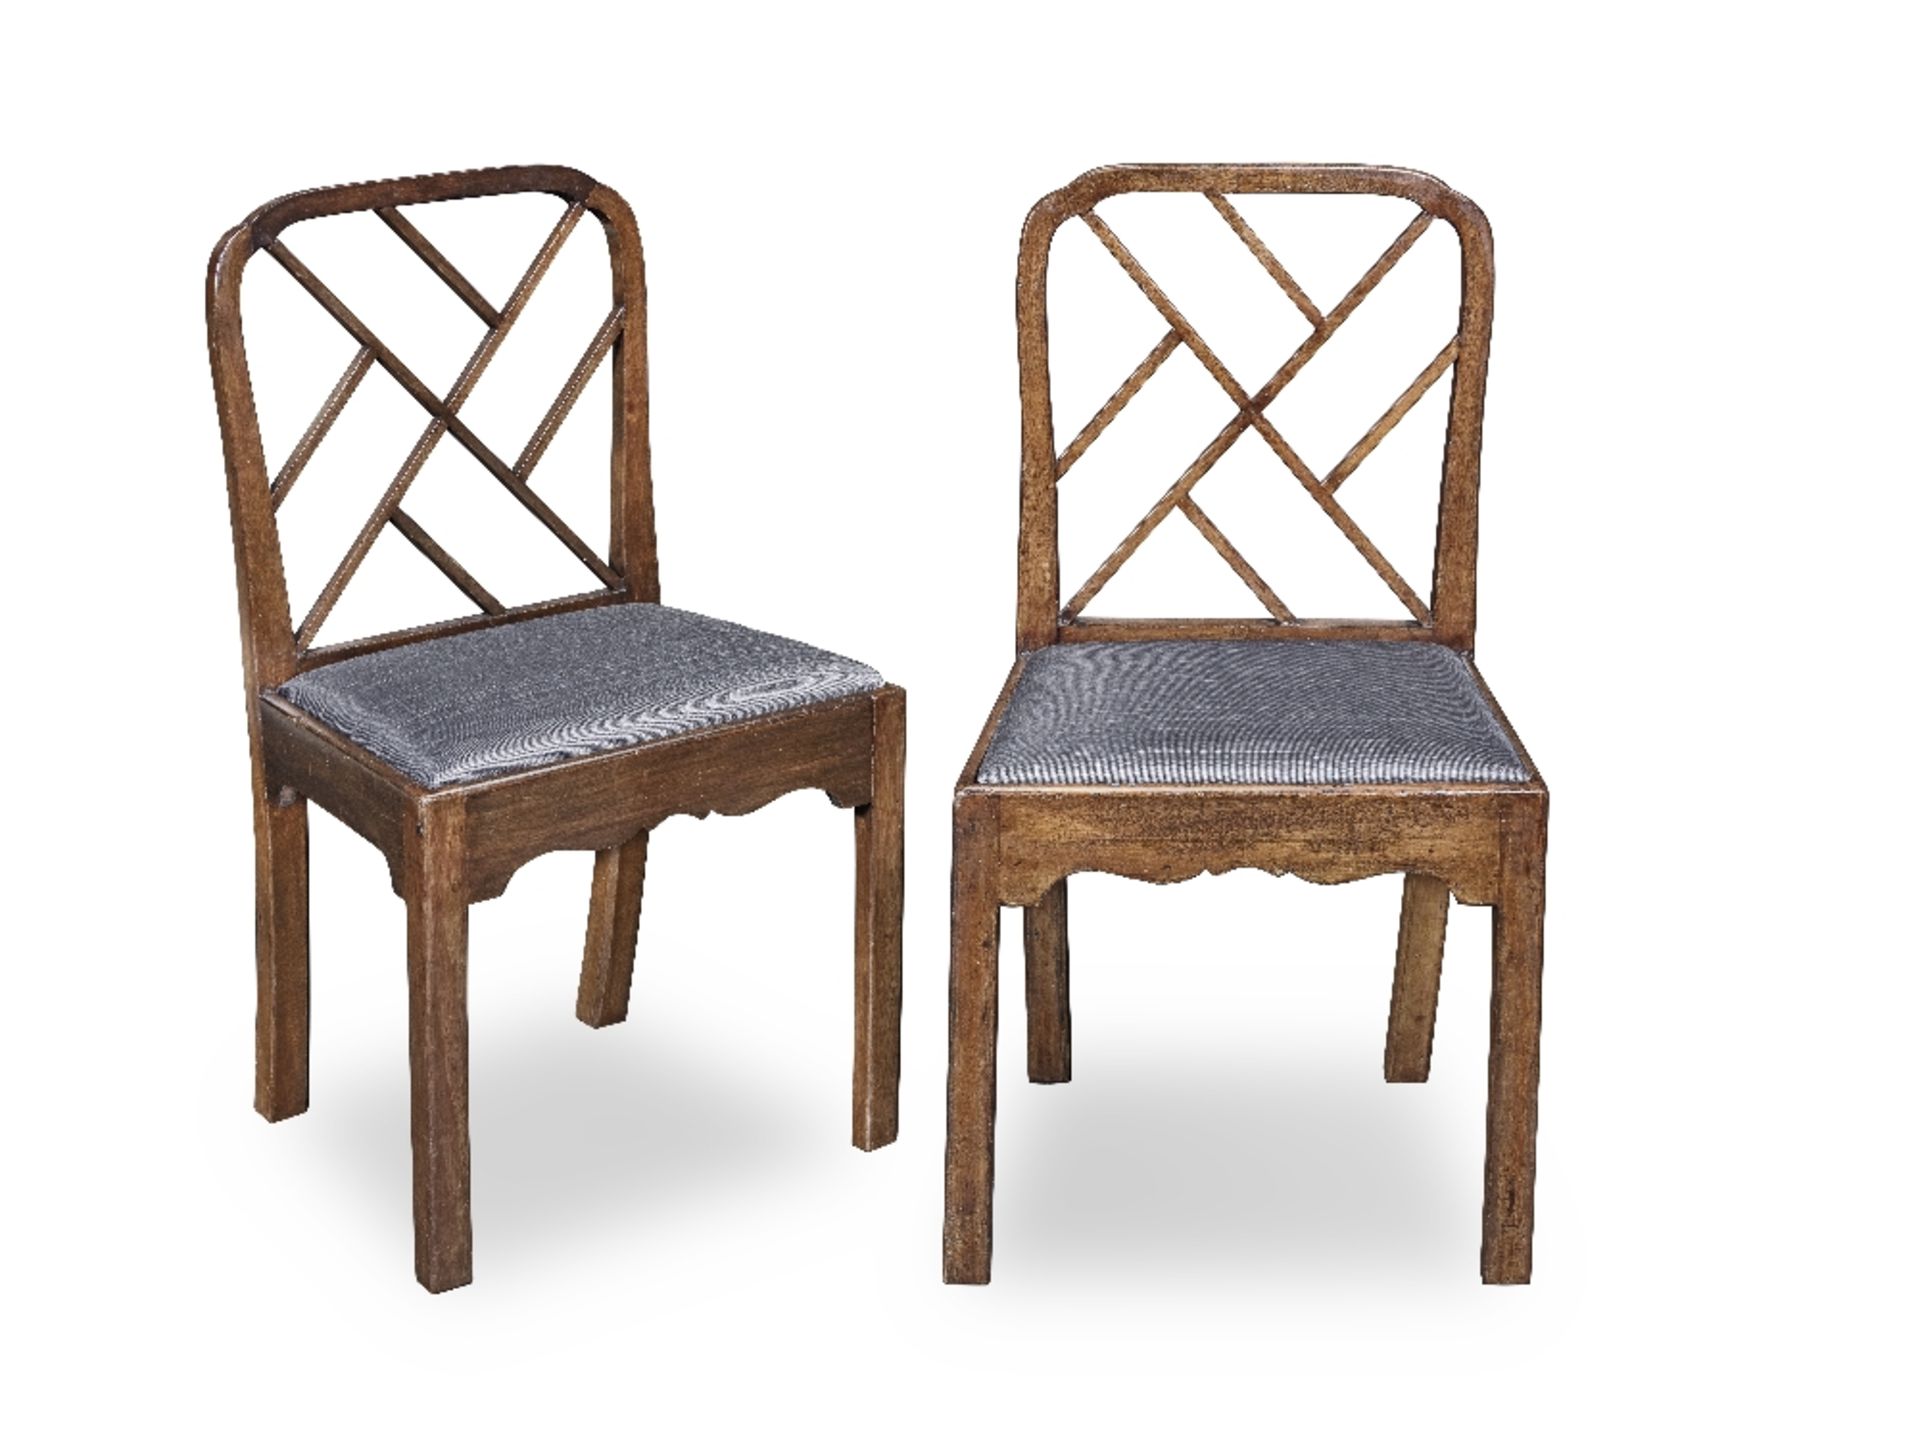 A matched pair of mahogany side chairs one chair late 18th century, the other late 19th/early 20...